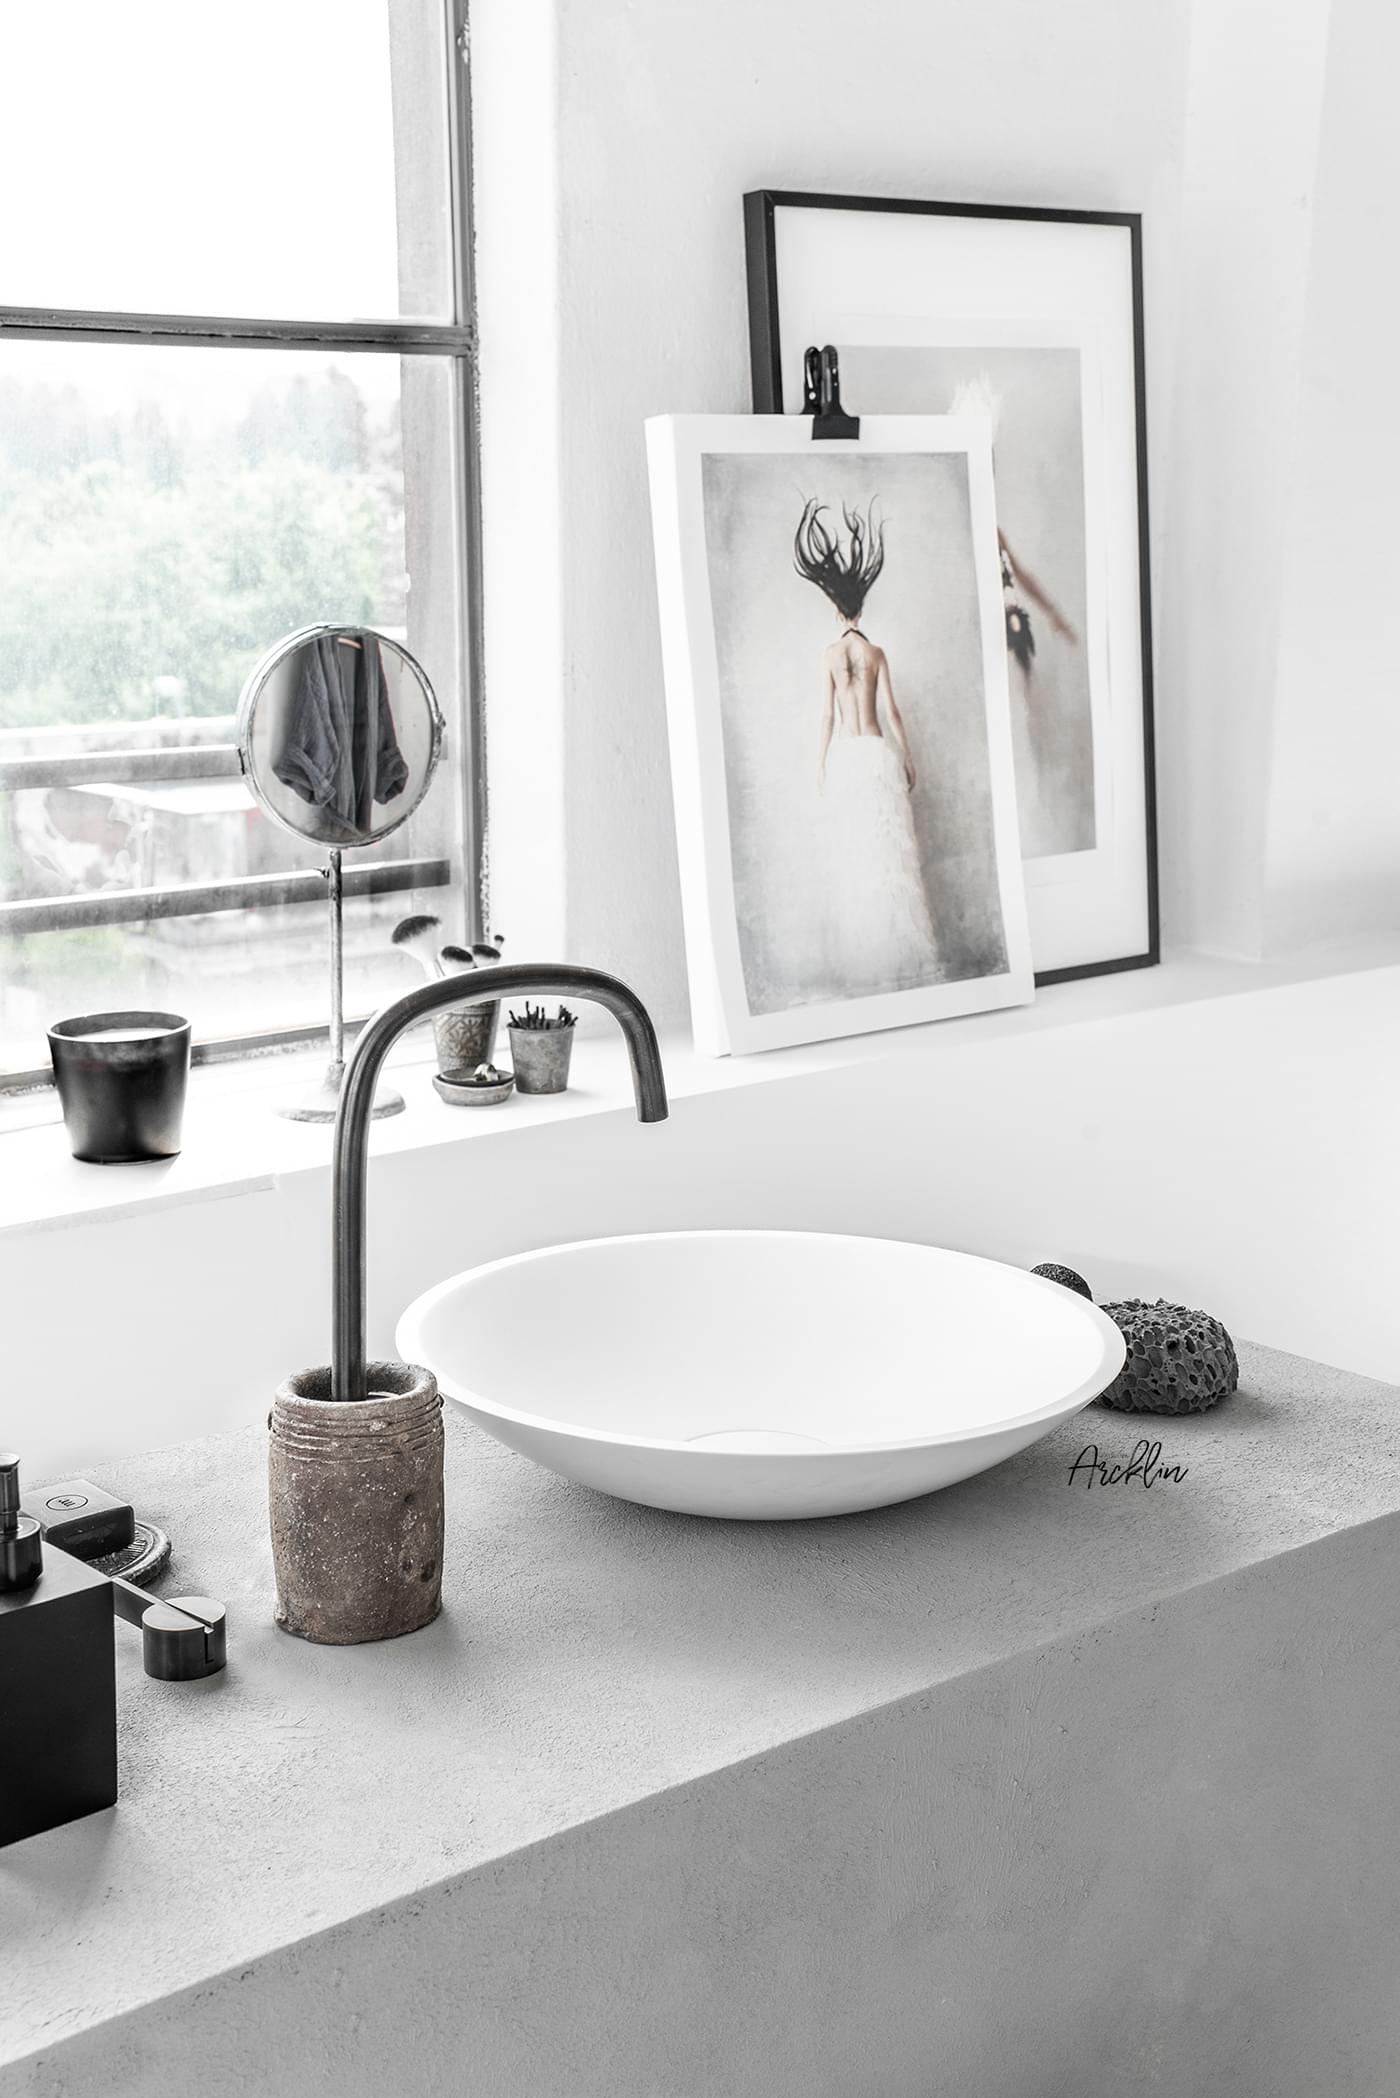 BY COCOON BATHROOMS